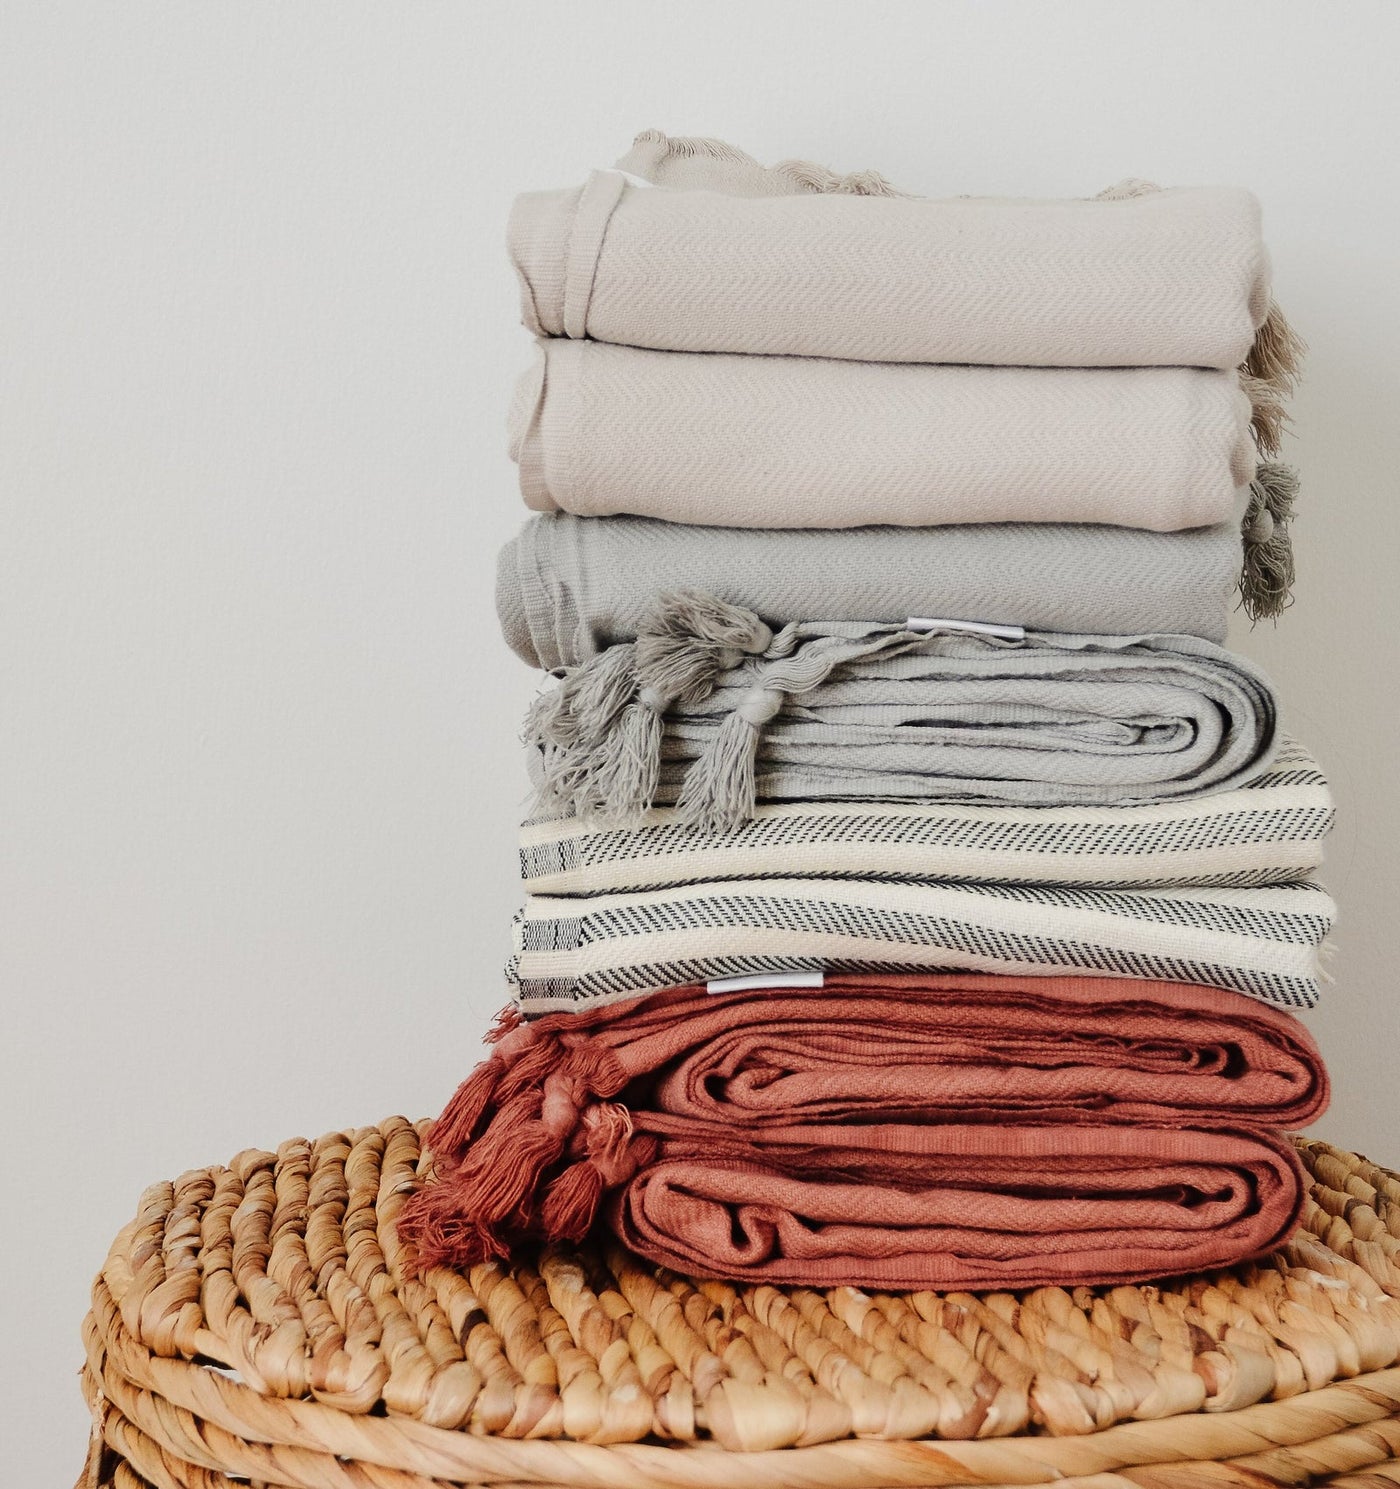 Turkish Towels: by House of Jude, folded and stacked in different colors on table. Oversized 63"x39.4", Available at Avalon Willow Home.